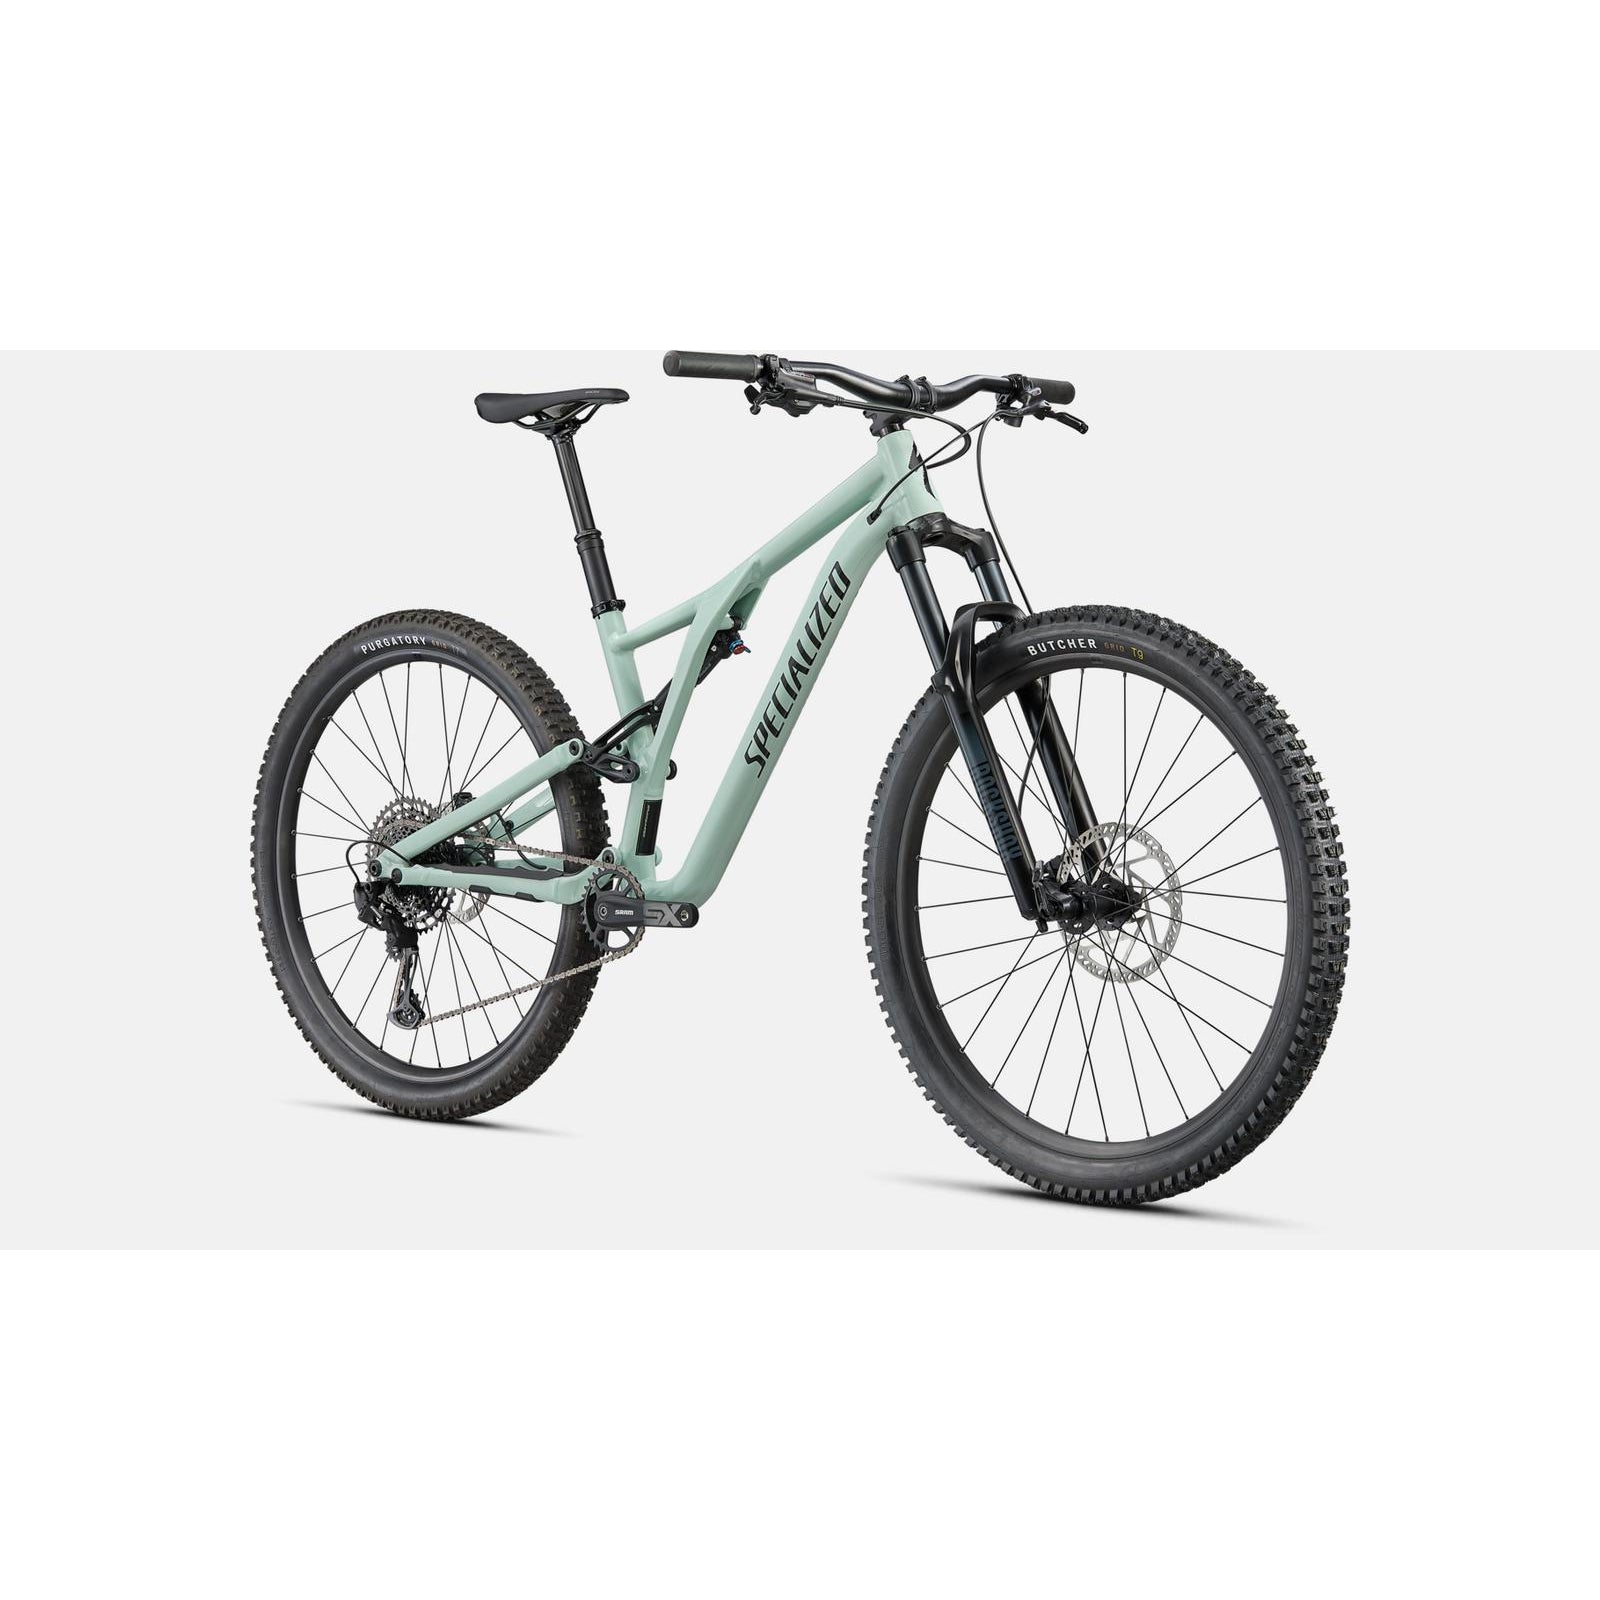 Specialized StumpJumper Alloy Full Suspension 29" Mountain Bike - Bikes - Bicycle Warehouse